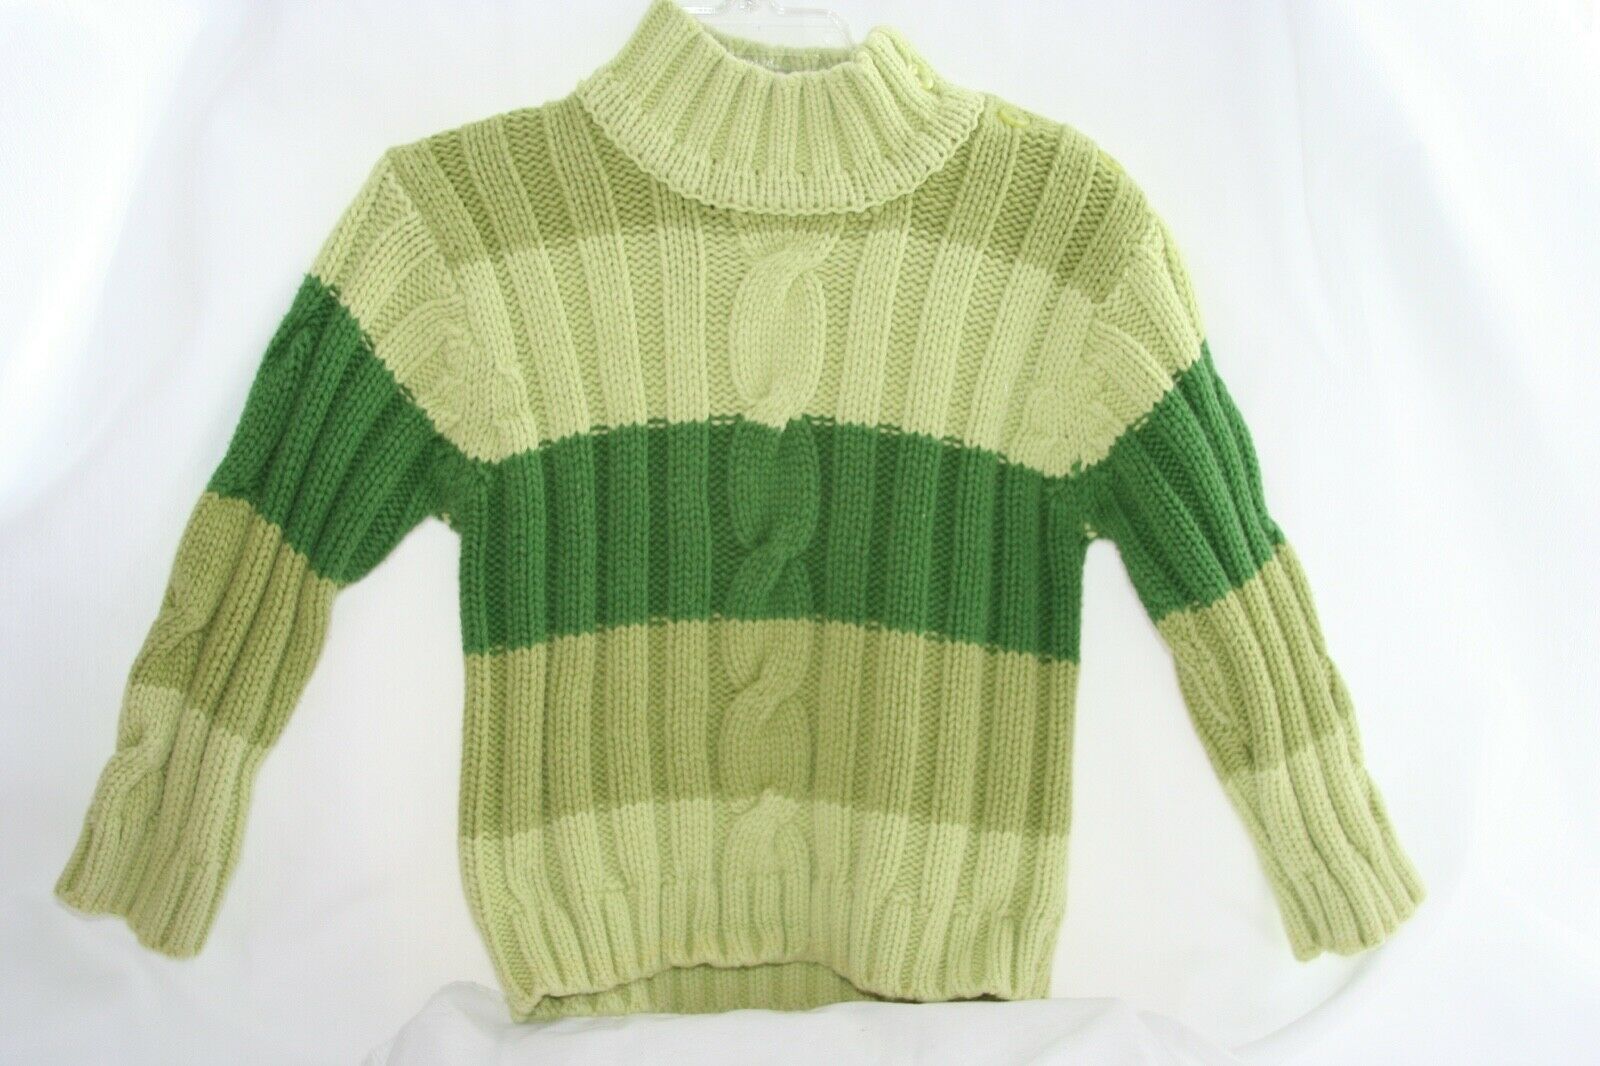 The Children’s Place Striped Green Ombre Sweater with MITTENS 36 month/3T - $14.84